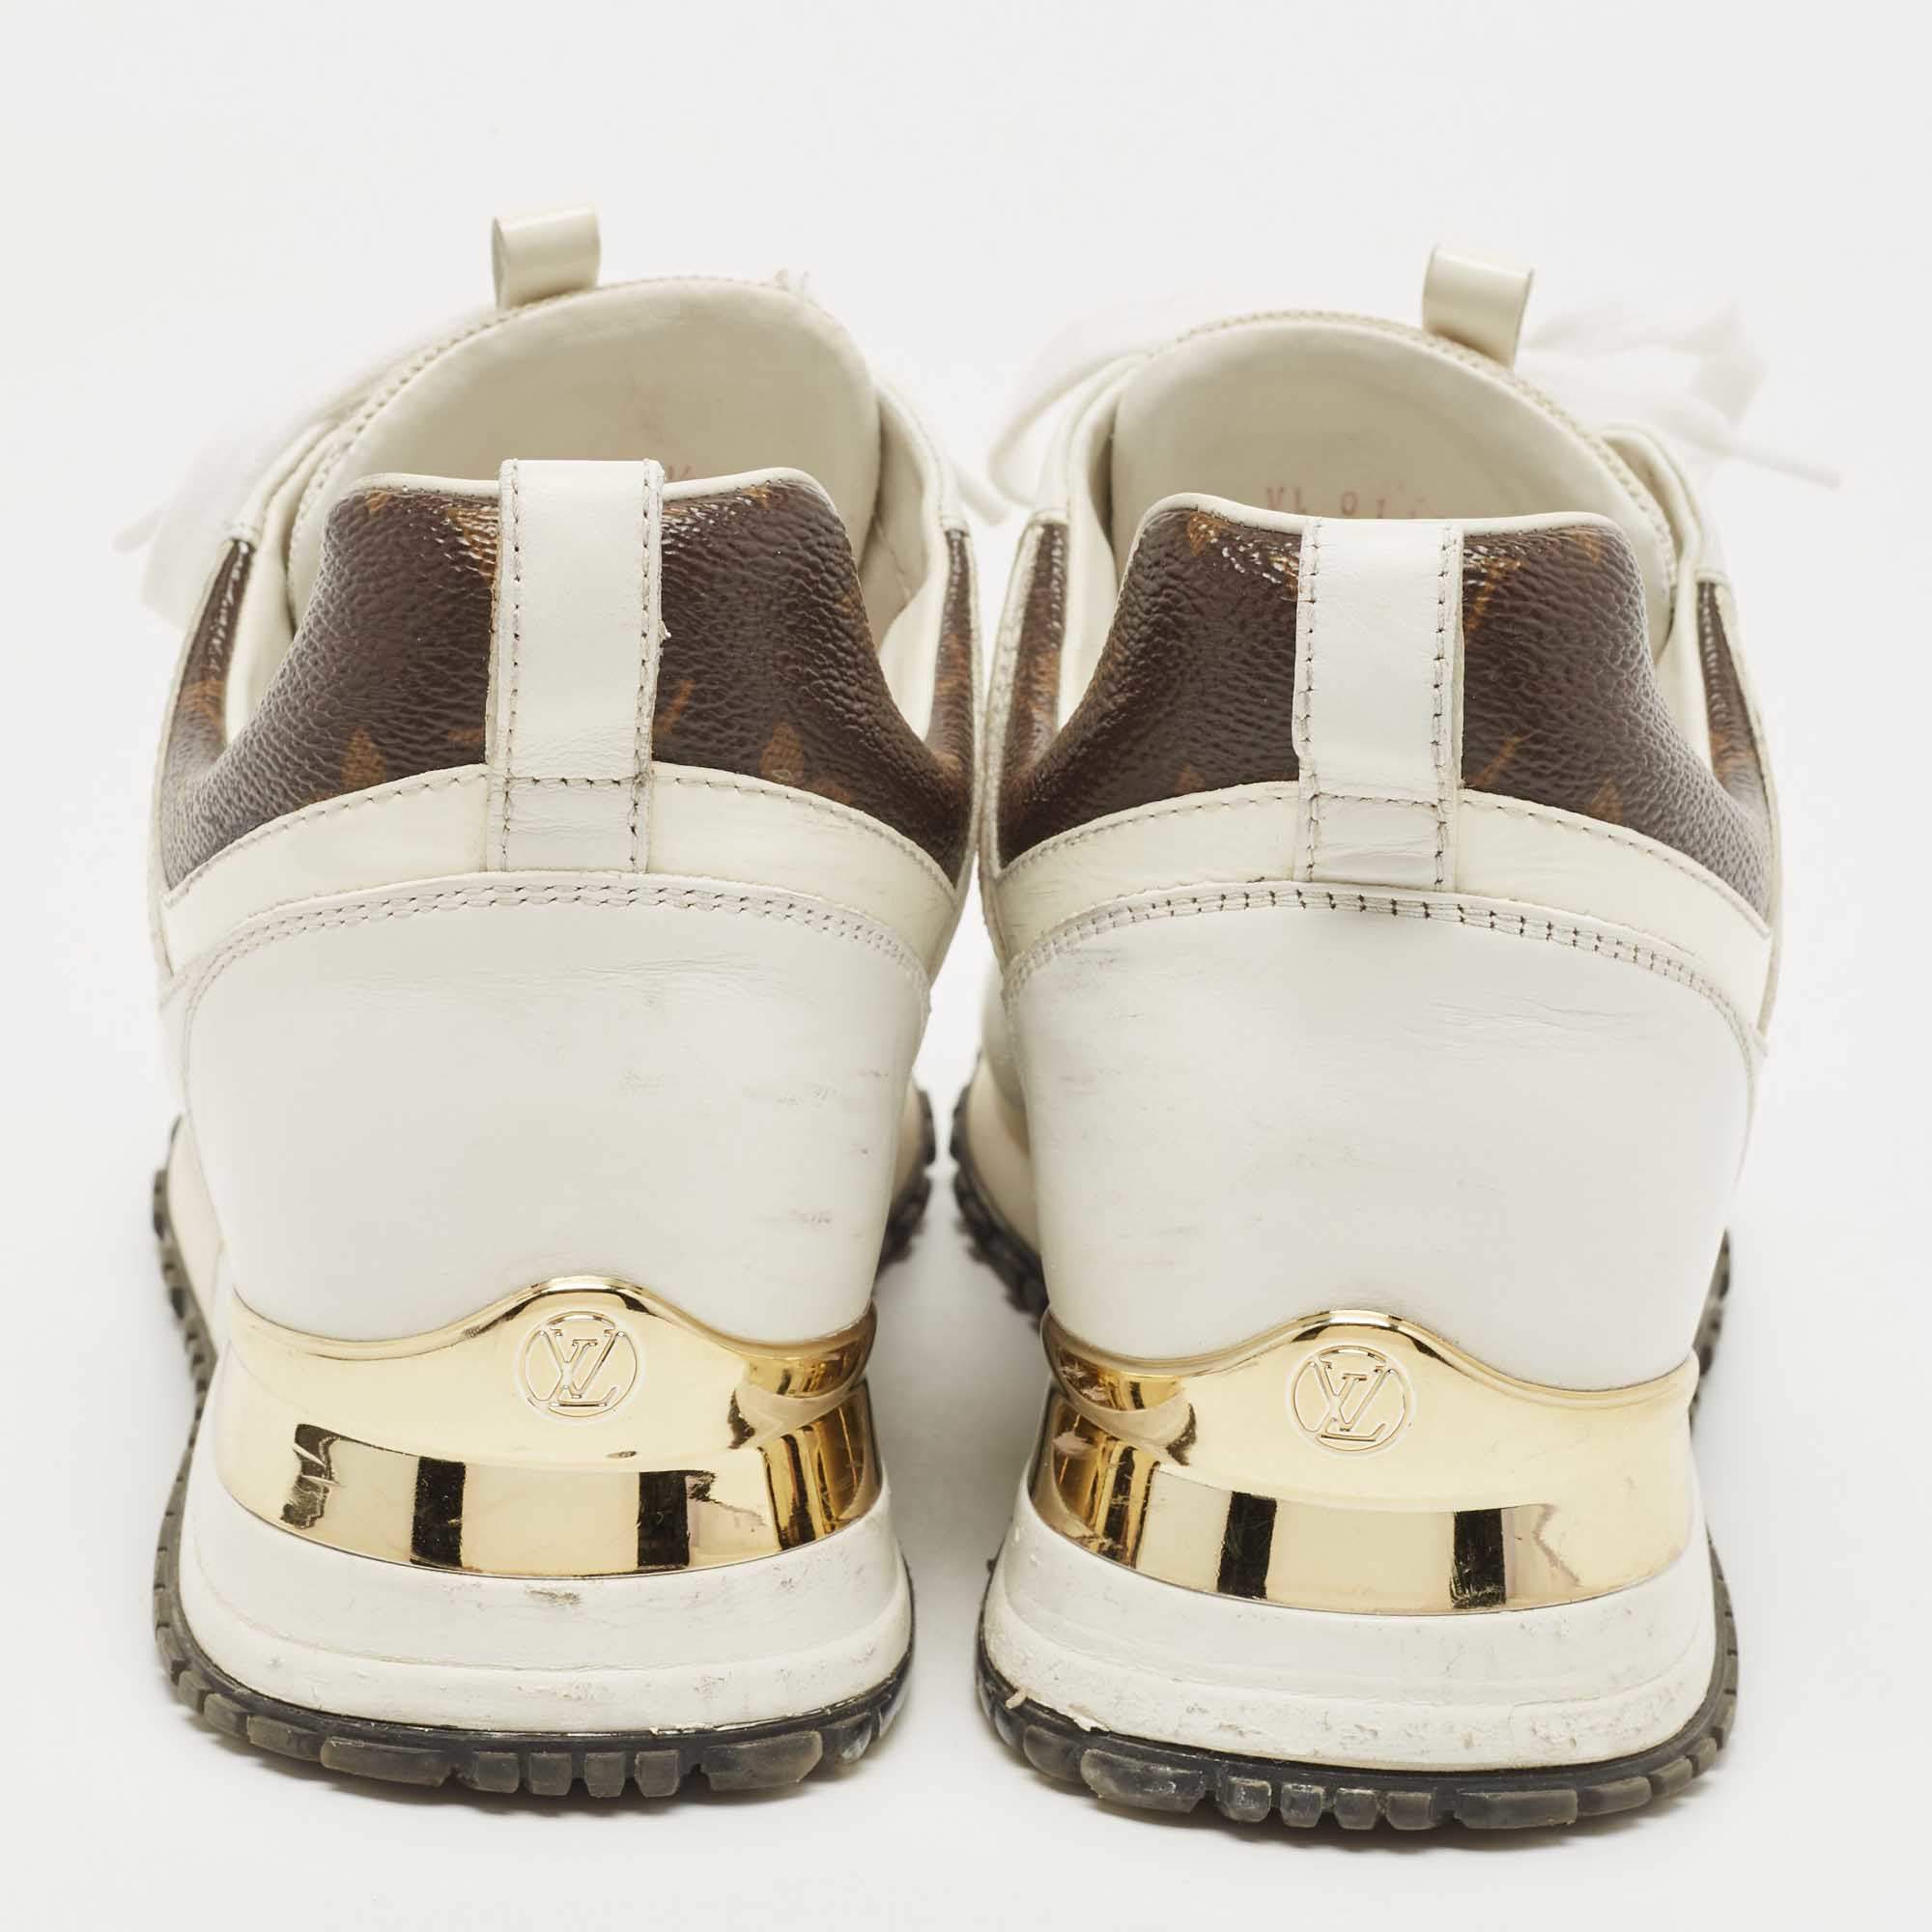 Run away leather trainers Louis Vuitton White size 35.5 IT in Leather -  37227844